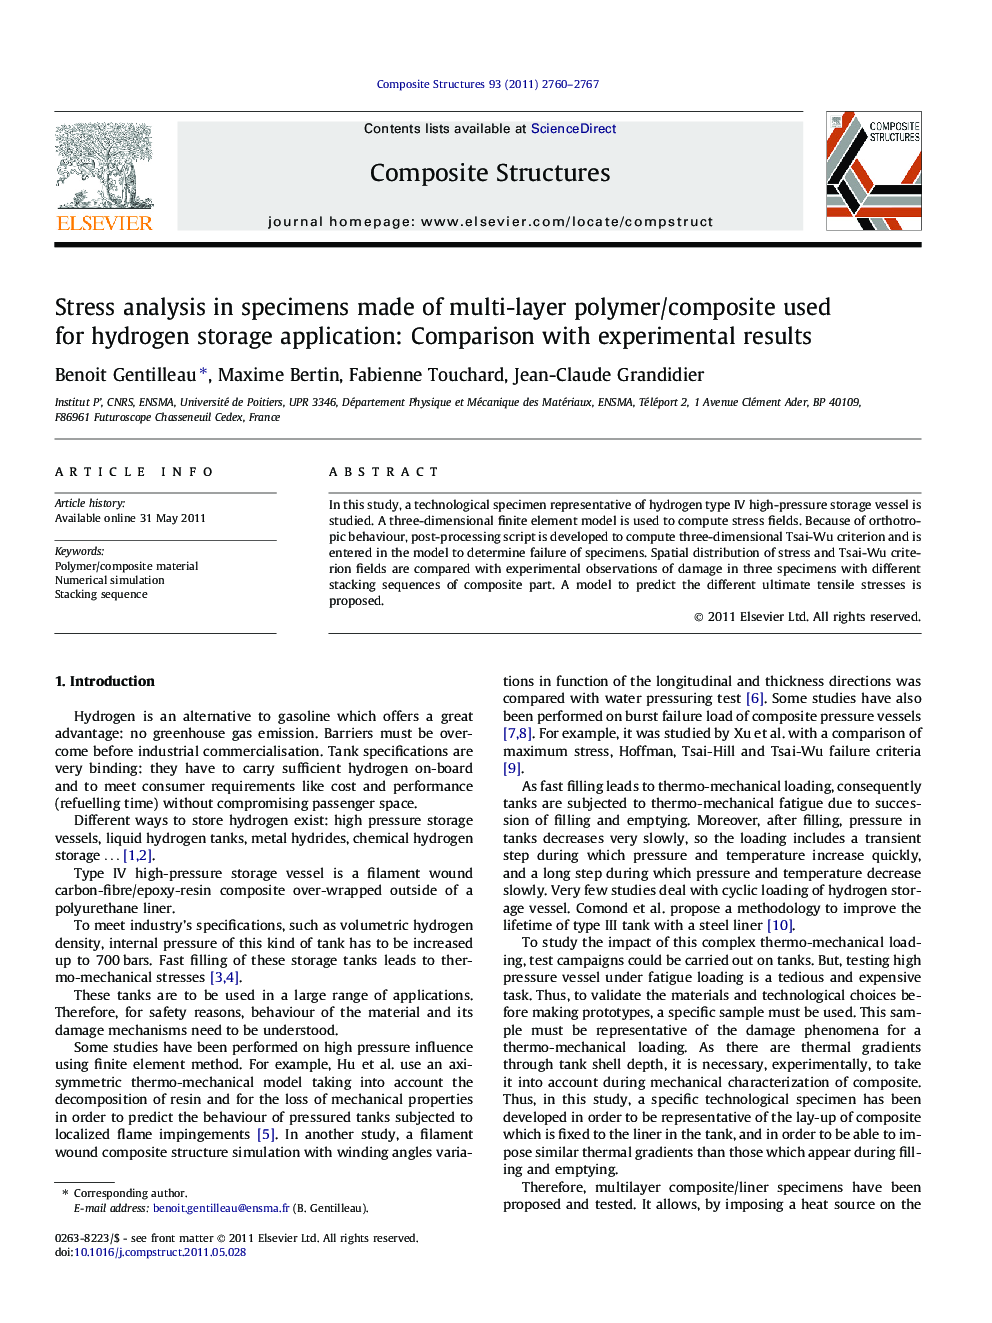 Stress analysis in specimens made of multi-layer polymer/composite used for hydrogen storage application: Comparison with experimental results